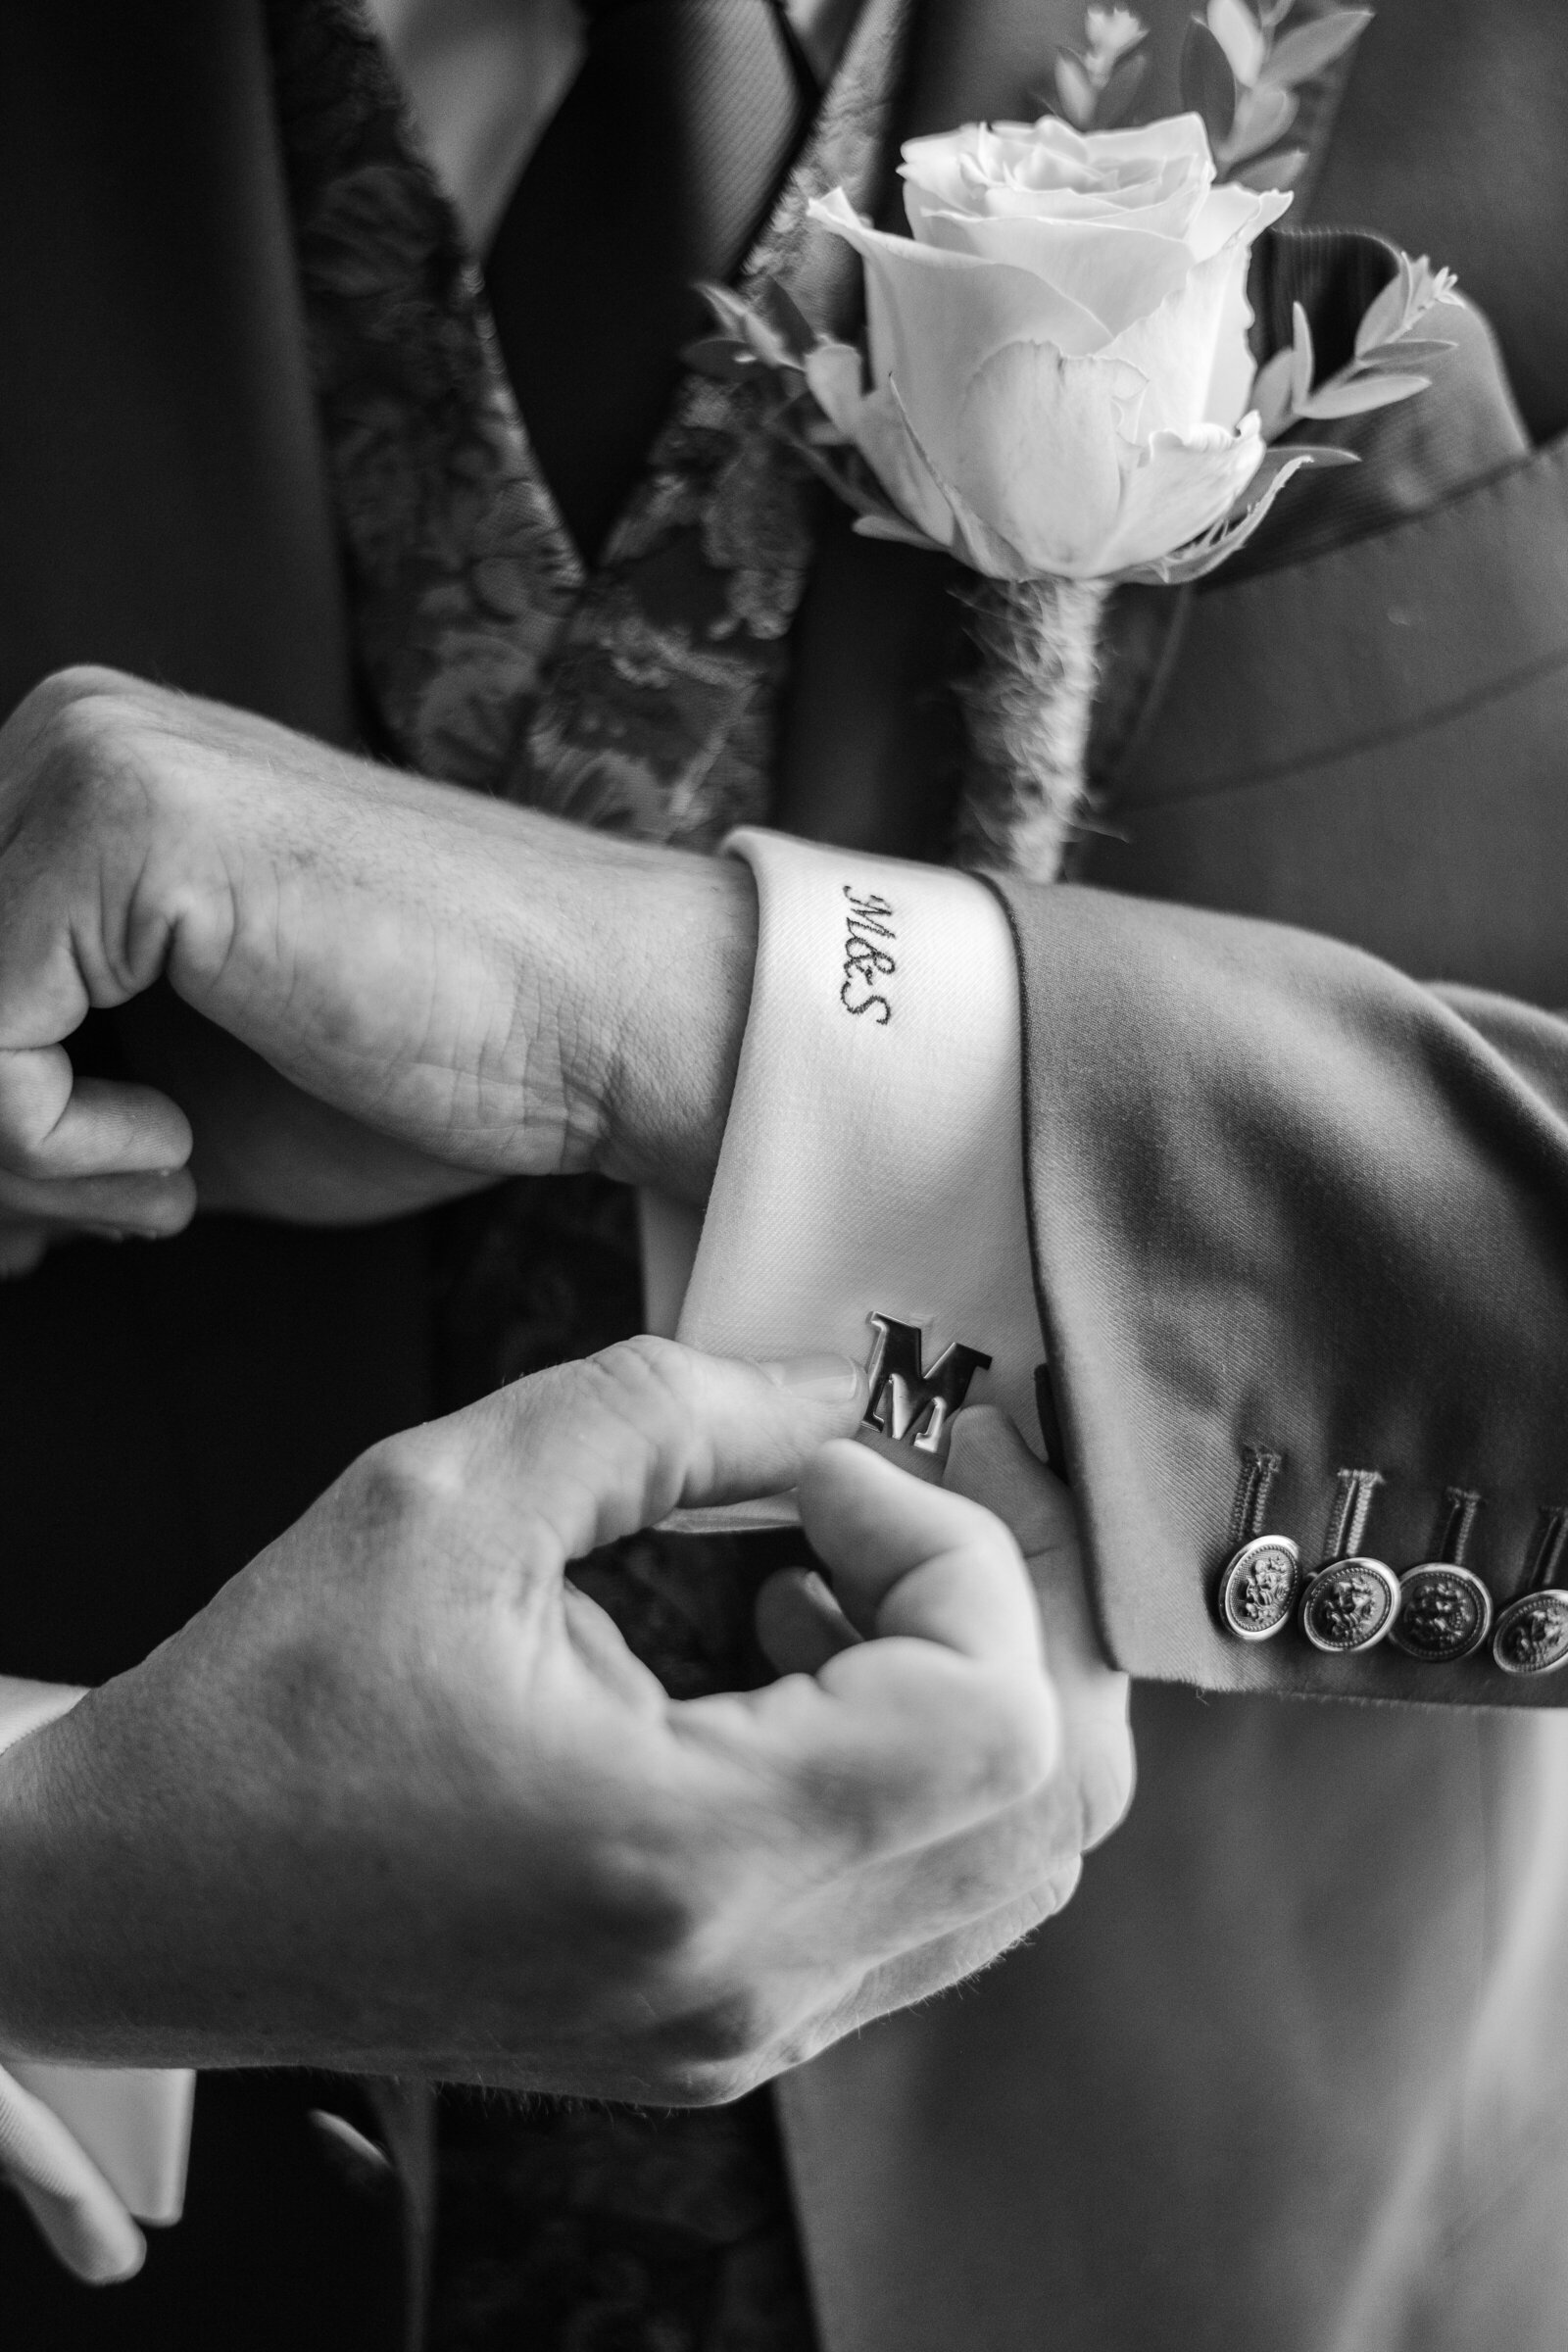 Menno shows his monogram cufflinks and custom embroidered suit with corsage on his summer wedding day